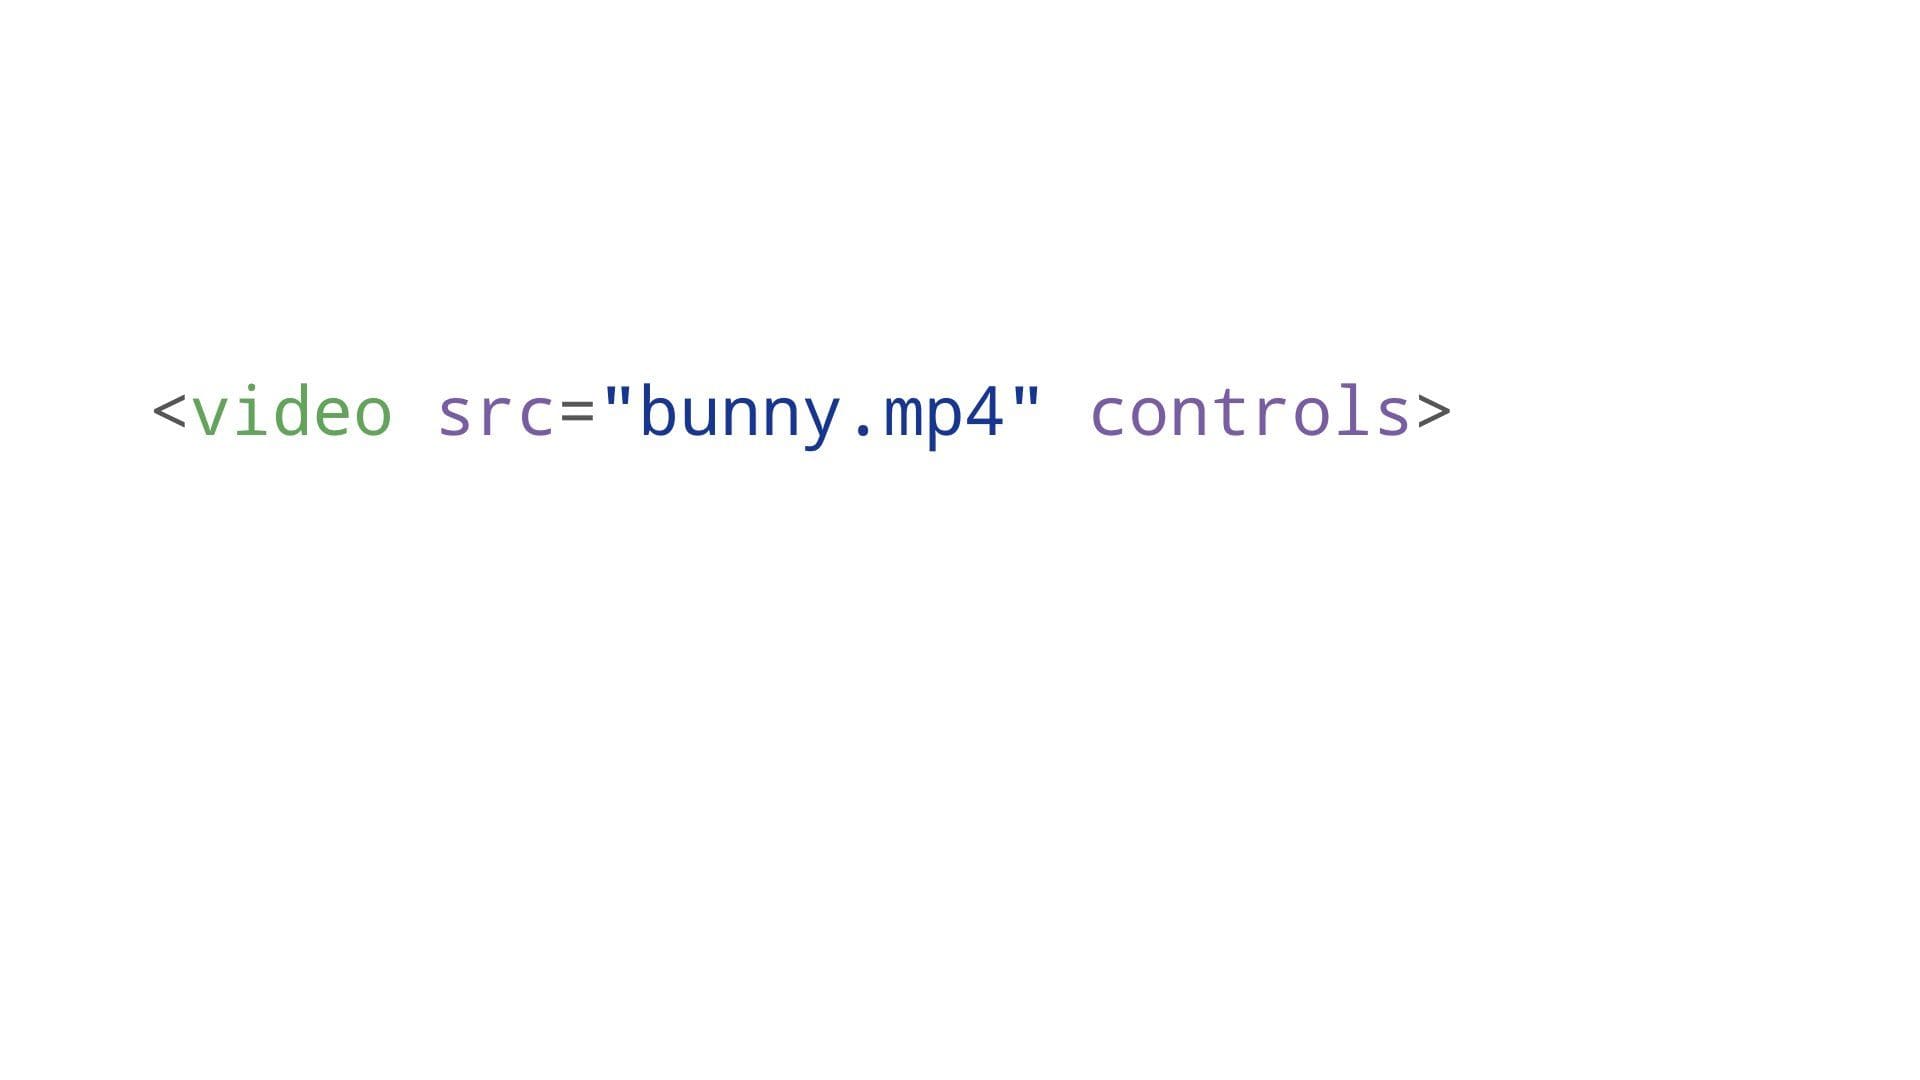 attributes: src with bunny.mp4, controls